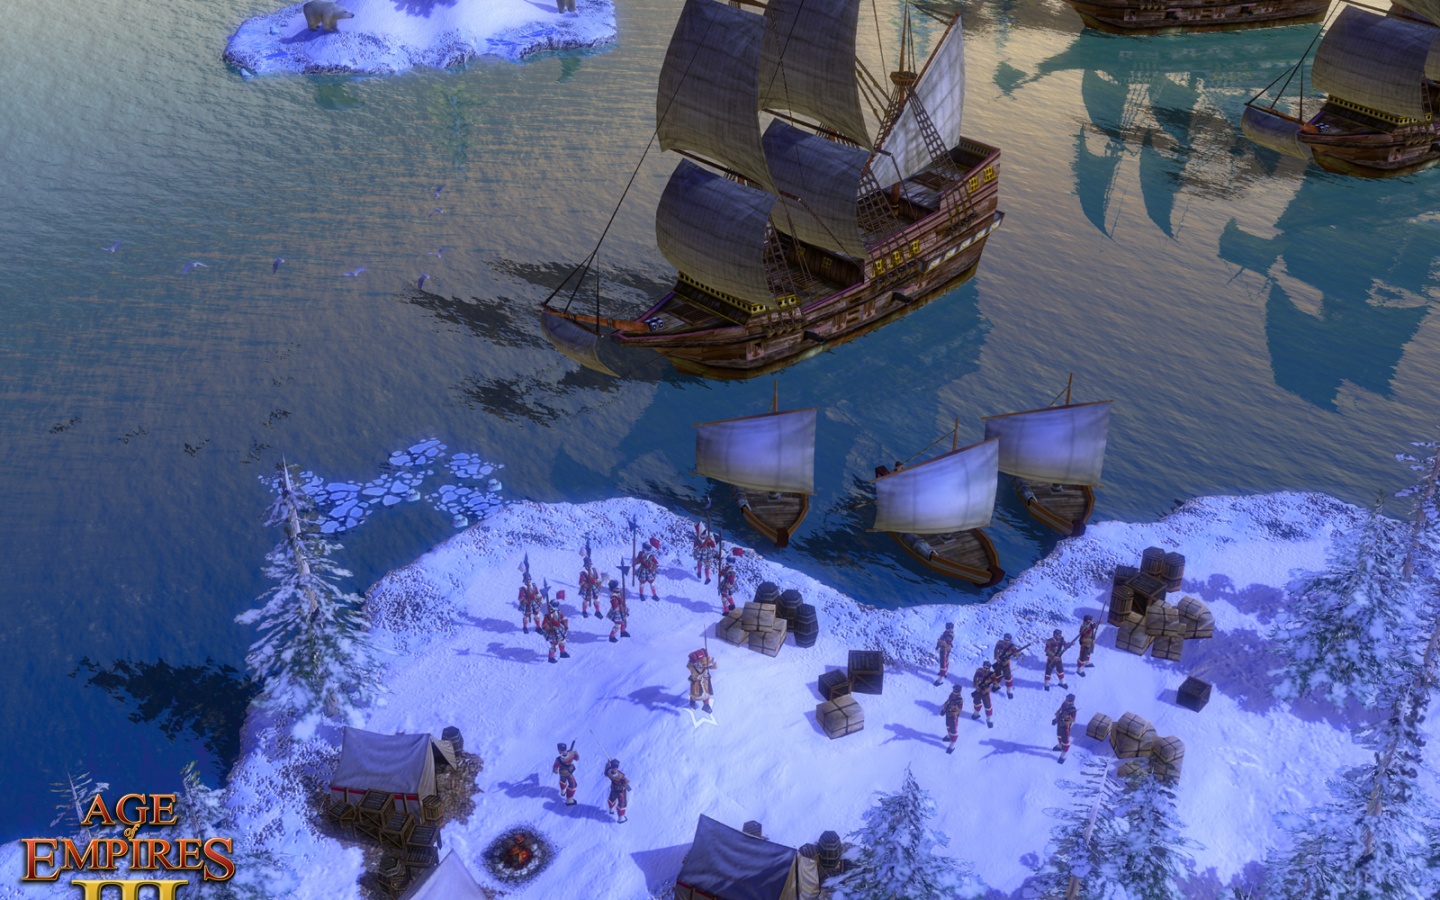 Free Age Of Empires Iii Wallpaper In 1440x900 | Kxws